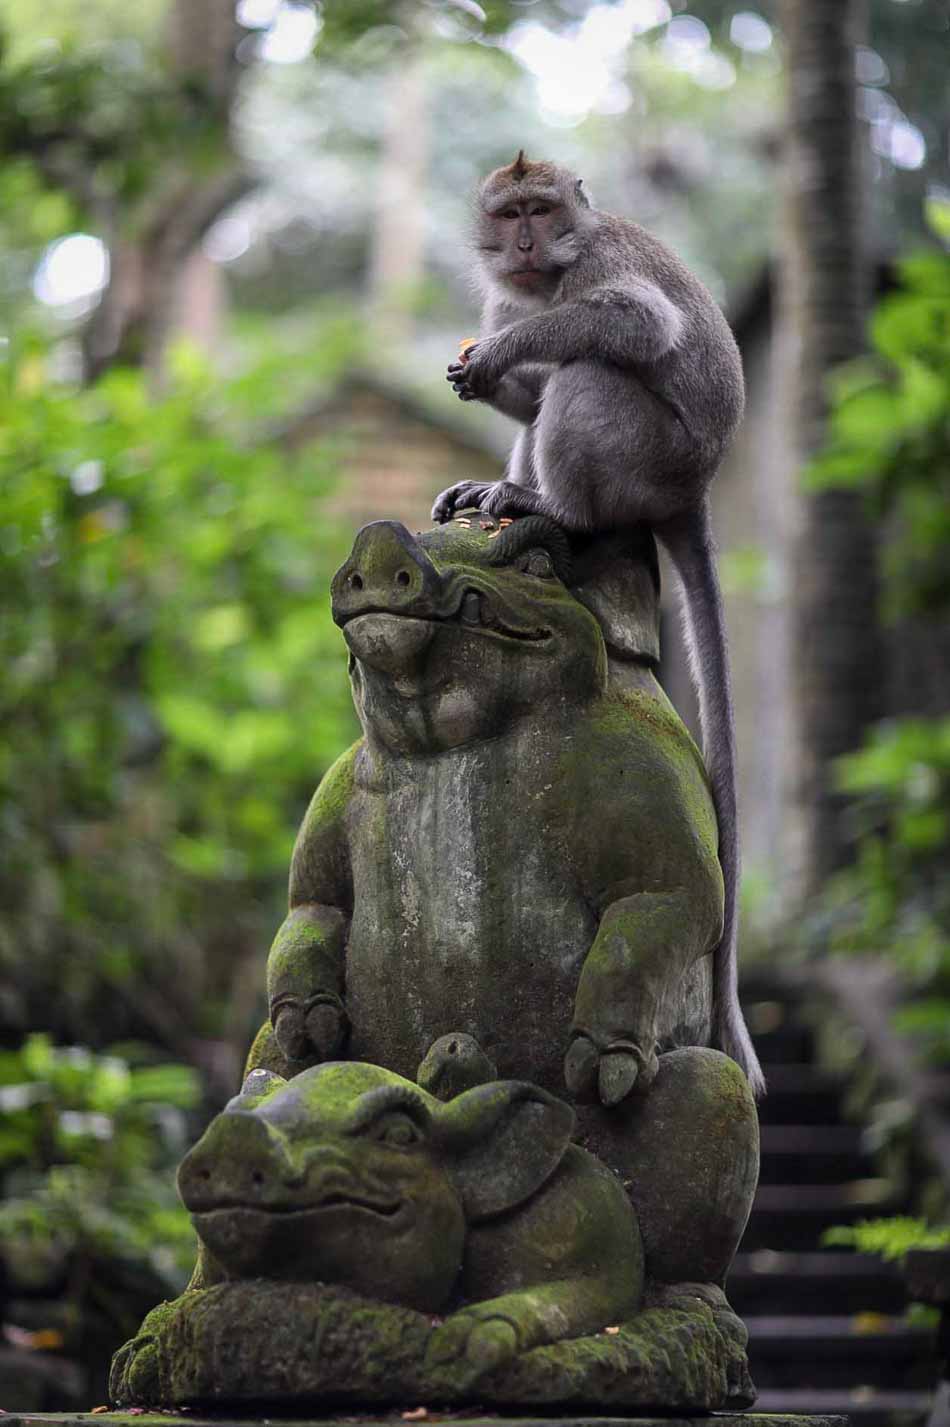 Monkey on a statue in Ubud Monkey Forest. Bali, Indonesia | Travel Photography